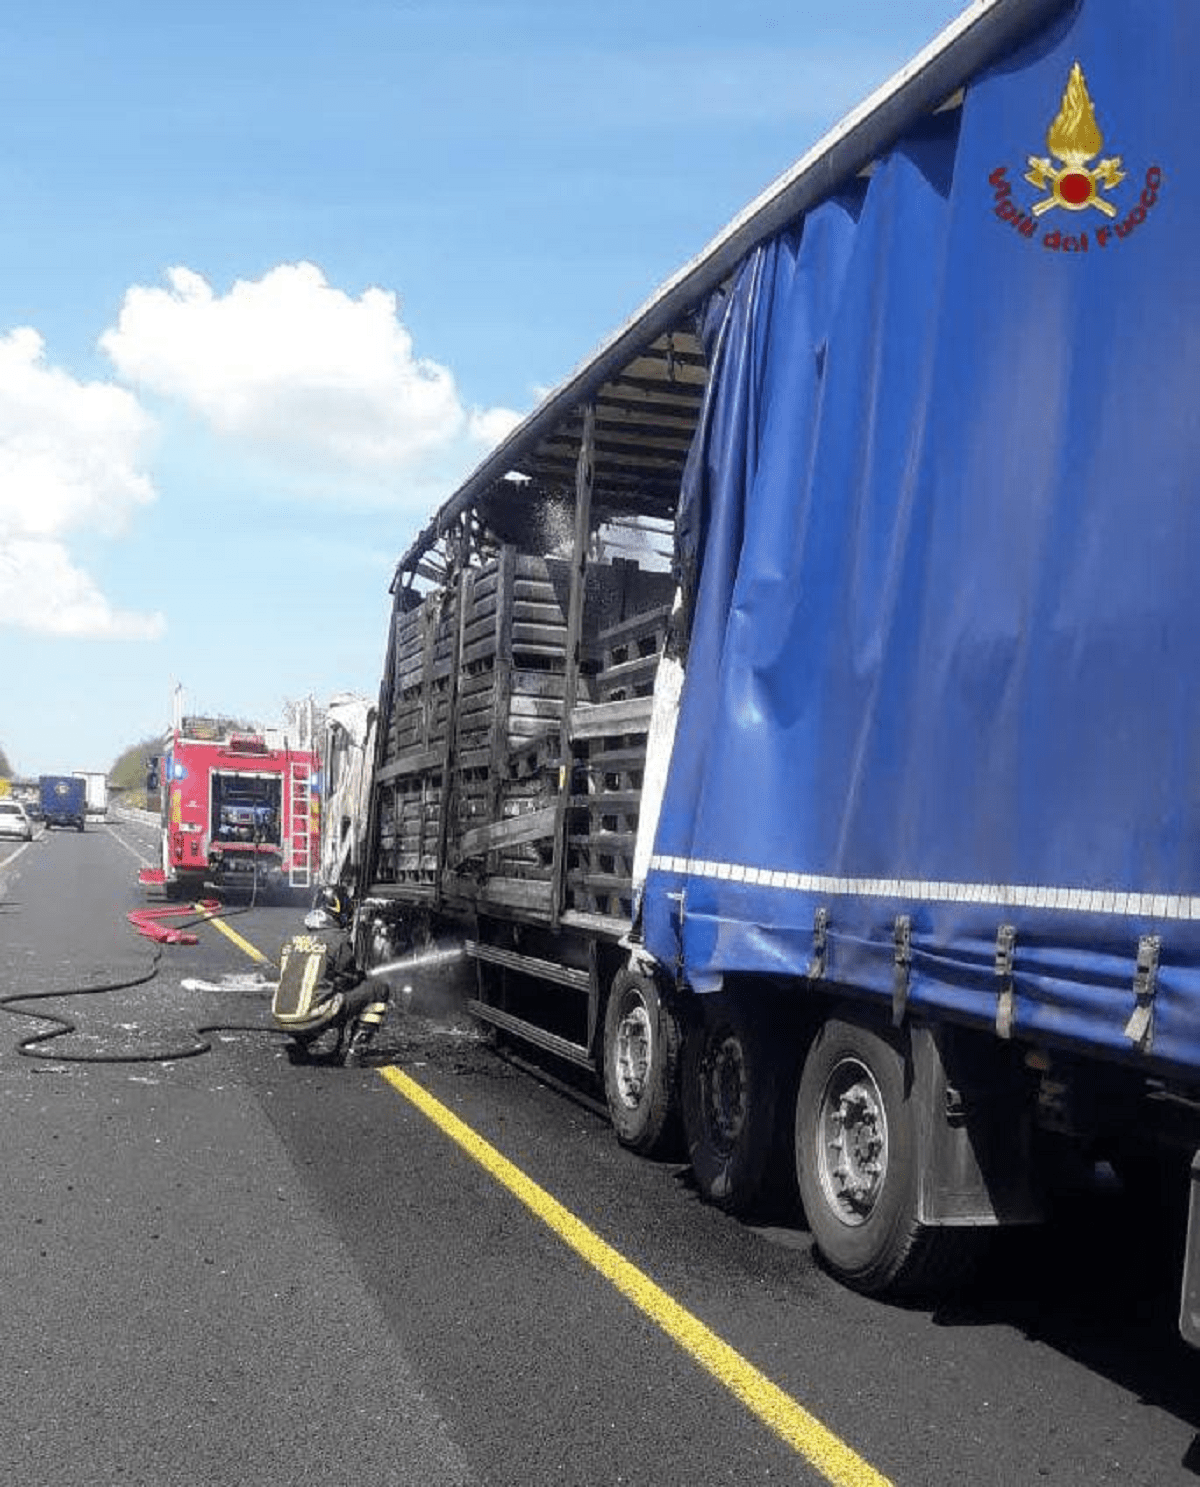 Camion in fiamme sull'A1